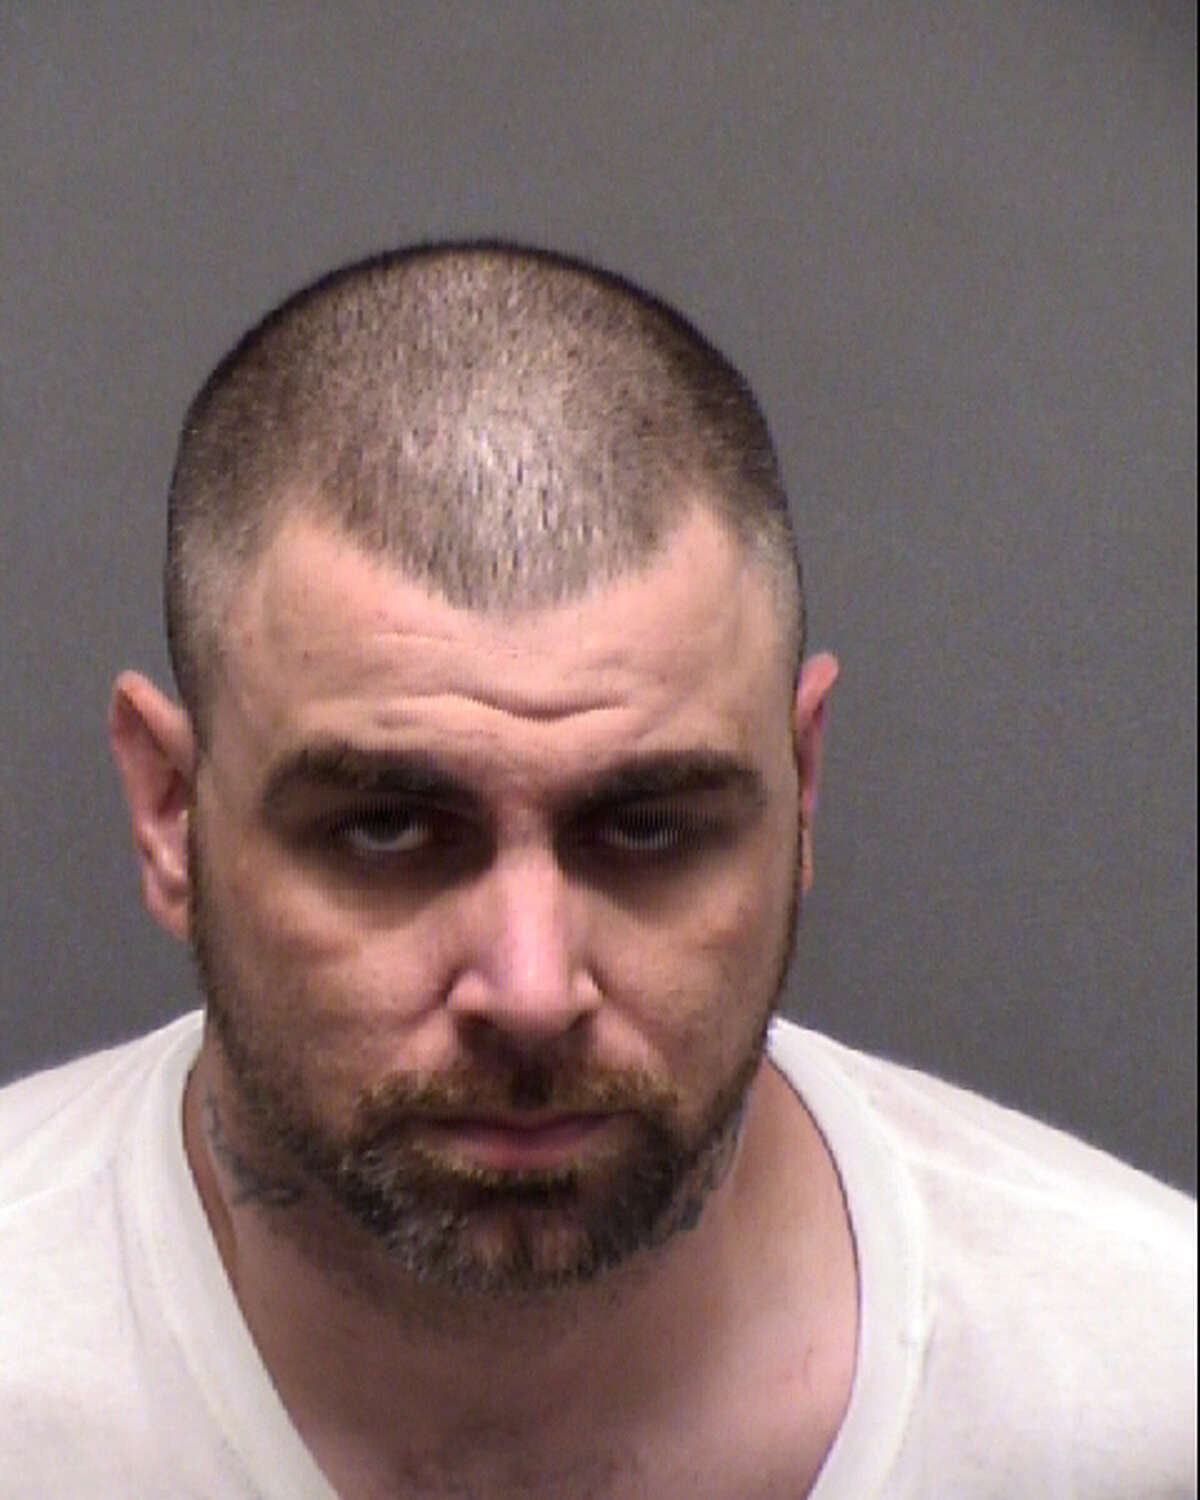 Jacob Corby, 32, was arrested after an officer-involved shooting at a Northwest Side motel on June 3, 2019. Corby is accused of backing into San Antonio police officers with a stolen car.